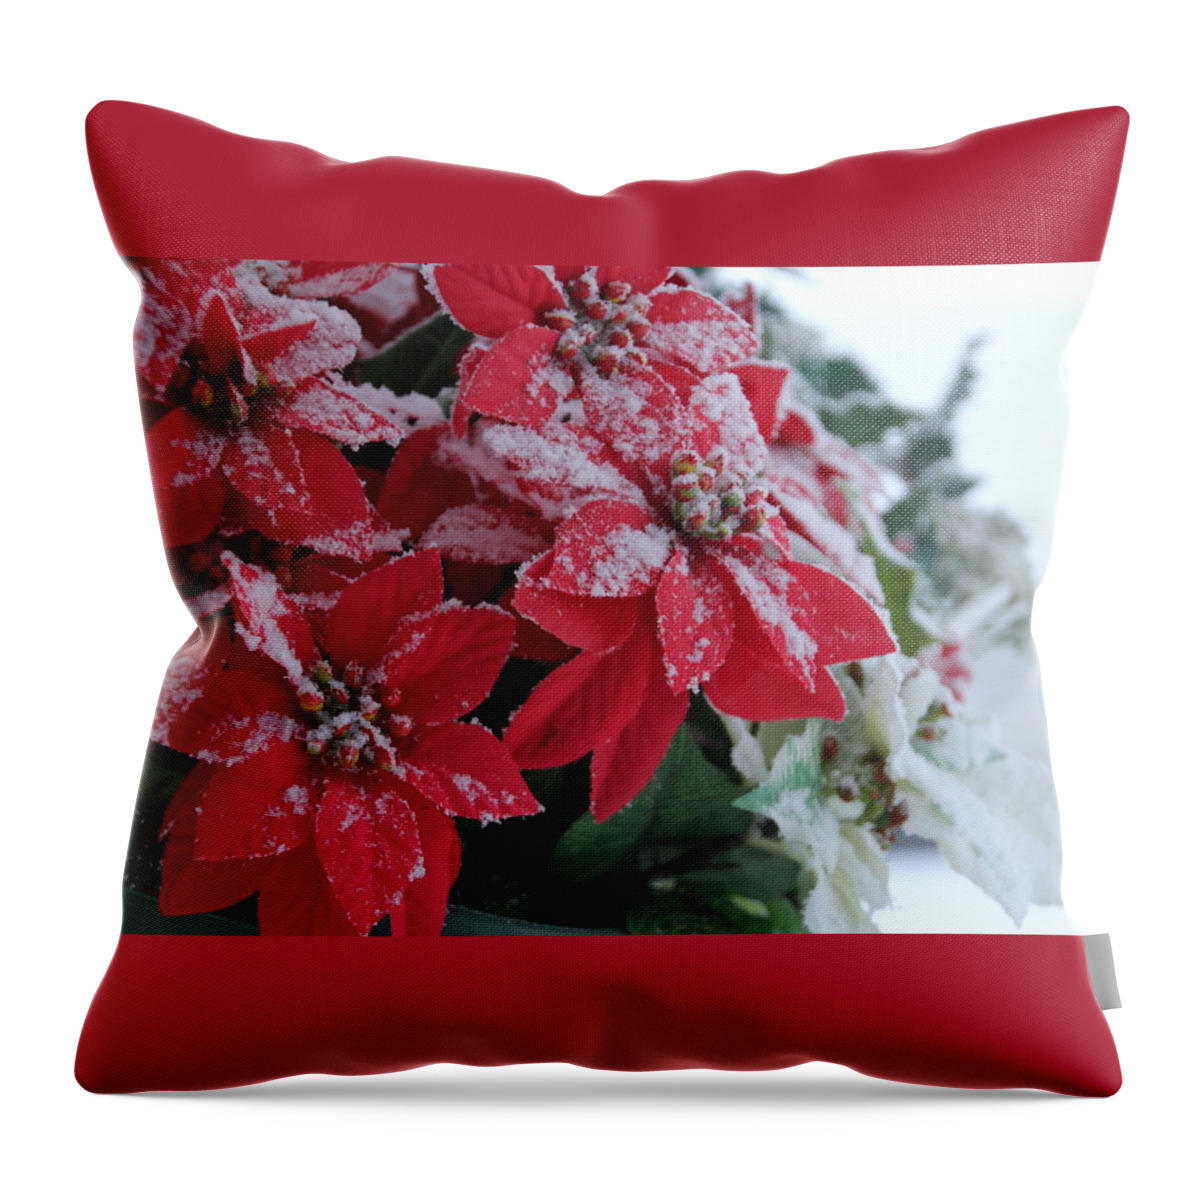 Poinsettia Throw Pillow featuring the photograph Christmas Poinsettia Flowers by Valerie Collins